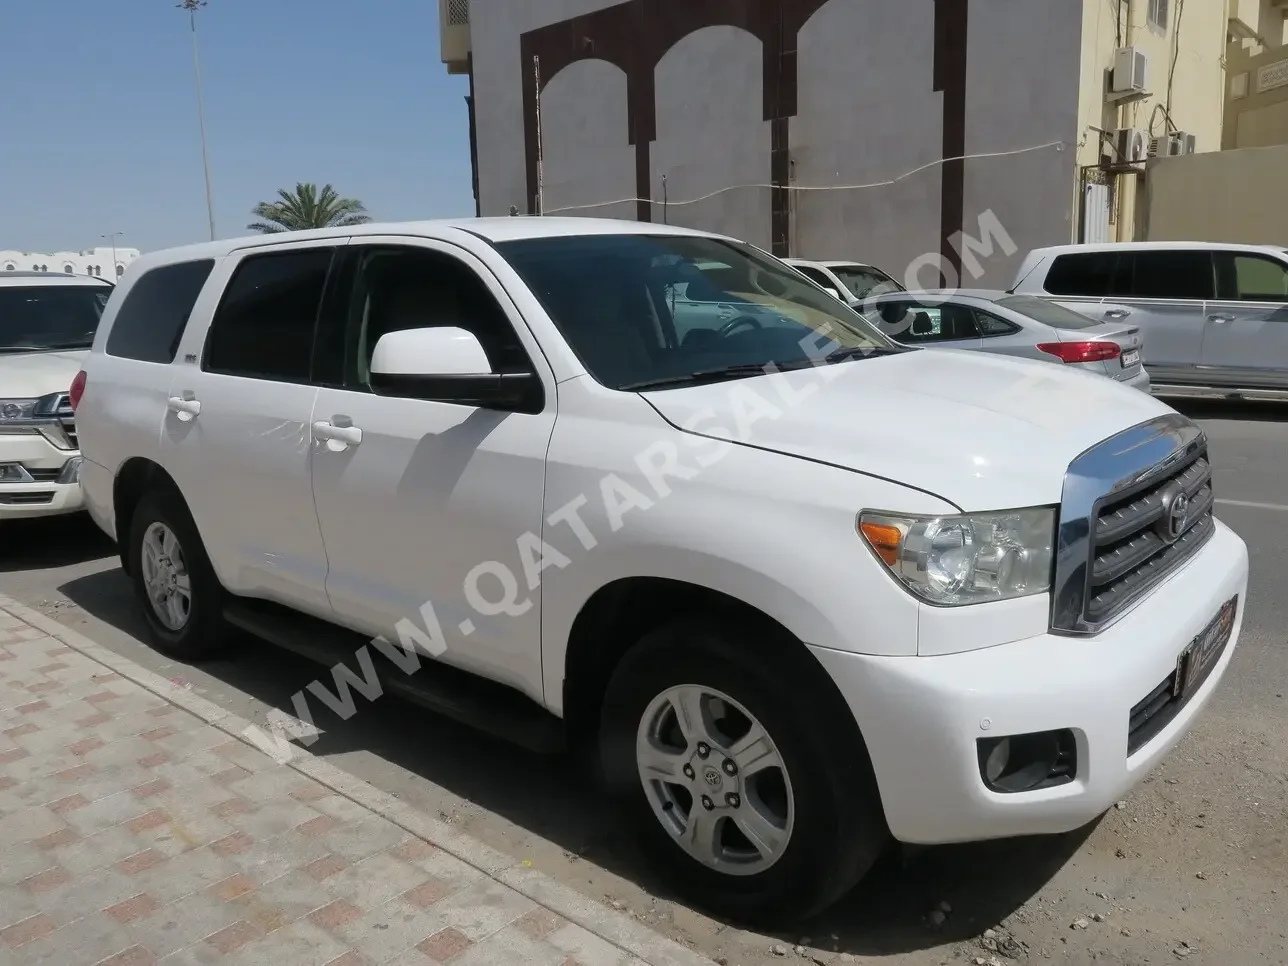 Toyota  Sequoia  2014  Automatic  127,000 Km  8 Cylinder  Four Wheel Drive (4WD)  SUV  White